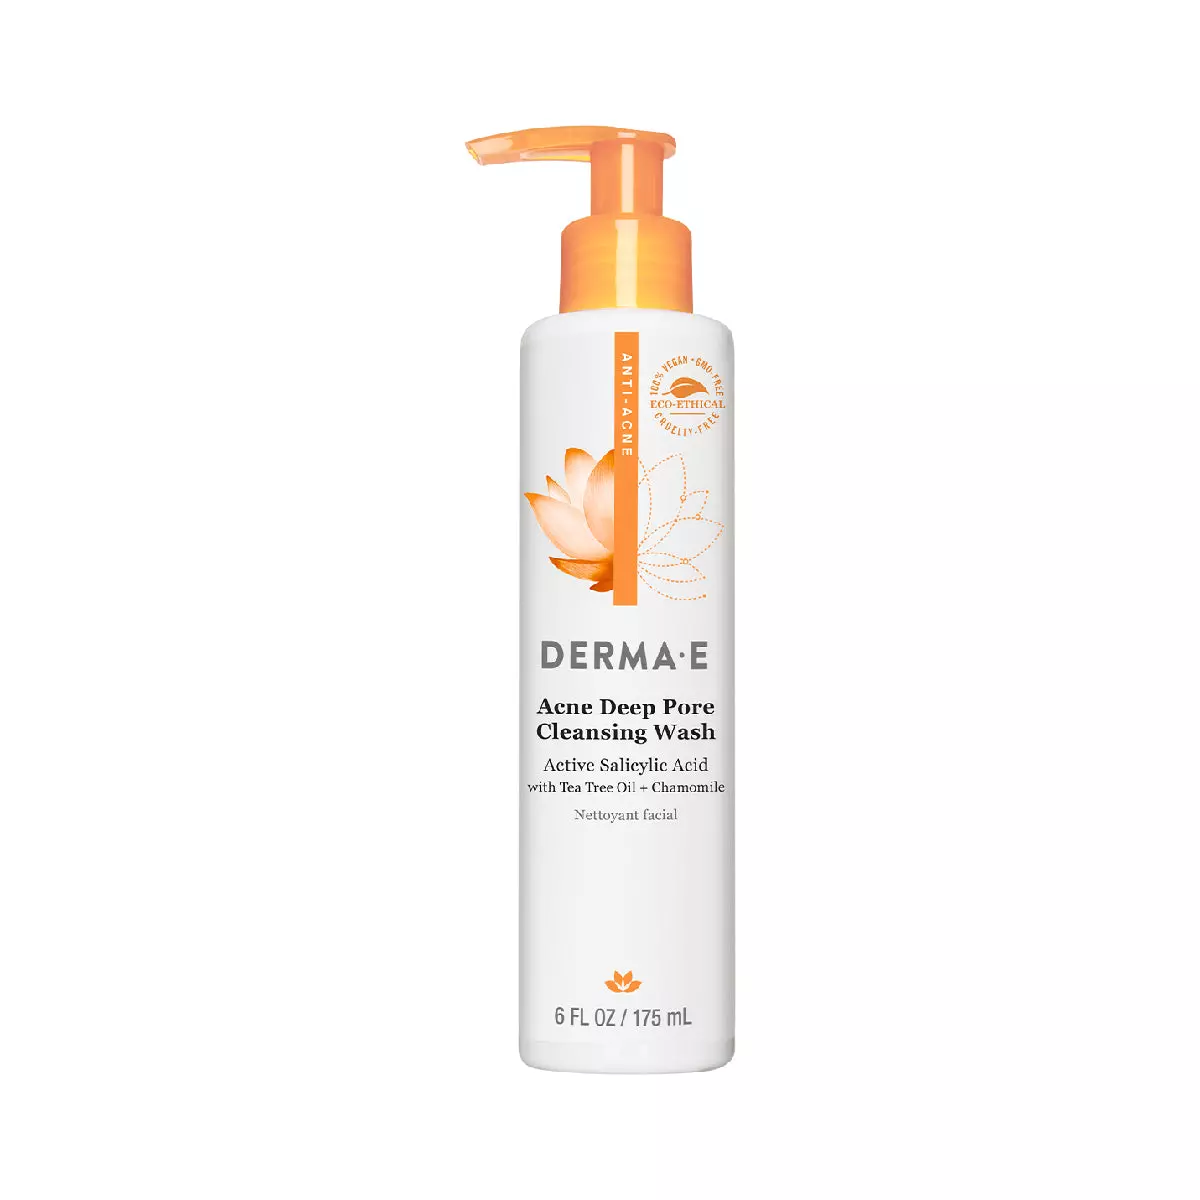 DERMA E Acne Deep Pore Cleansing Wash ? Blemish Control Facial Cleanser with Salicylic Acid - Gentle Oil Control Face Wash Soothes and Balances Skin, 6 fl oz